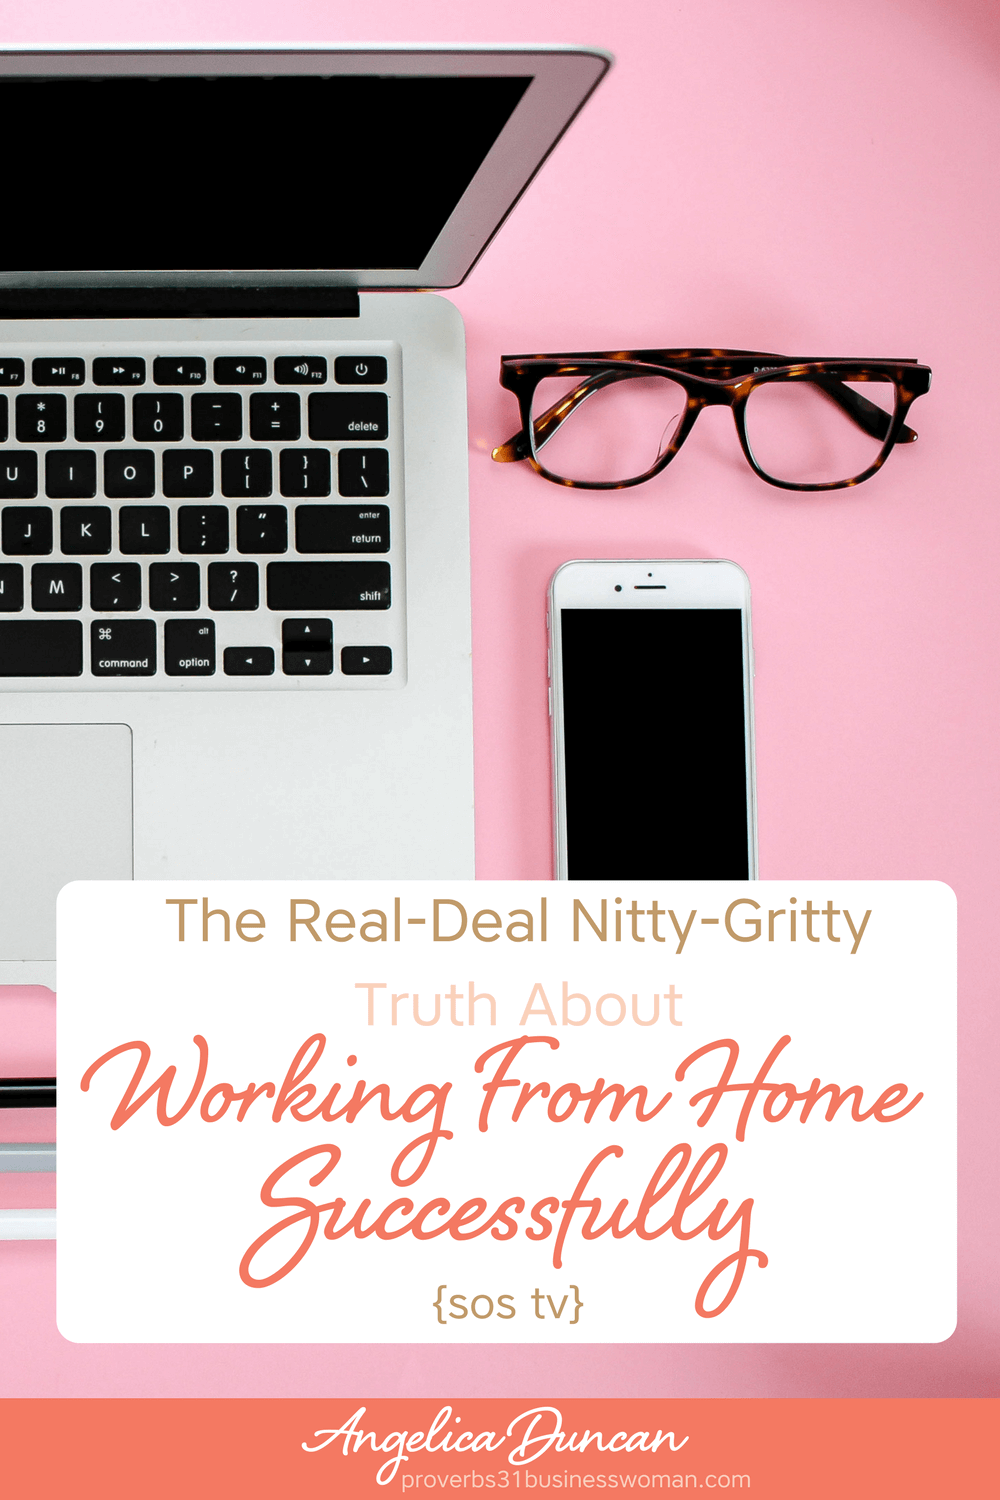 Working from home successfully is more than just a glammed up pipe dream. It takes a lot of dedication and discipline. Let me share some insights with you! #mompreneur #onlinebusiness #wahm #womeninbusiness #christianbusiness #christianwomeninbusiness #christianentrepreneurs #proverbs31 #proverbs31woman #proverbs31businesswoman #proverbs31enrepreneur #p31 #angelicaduncan #silkoversteel #sos